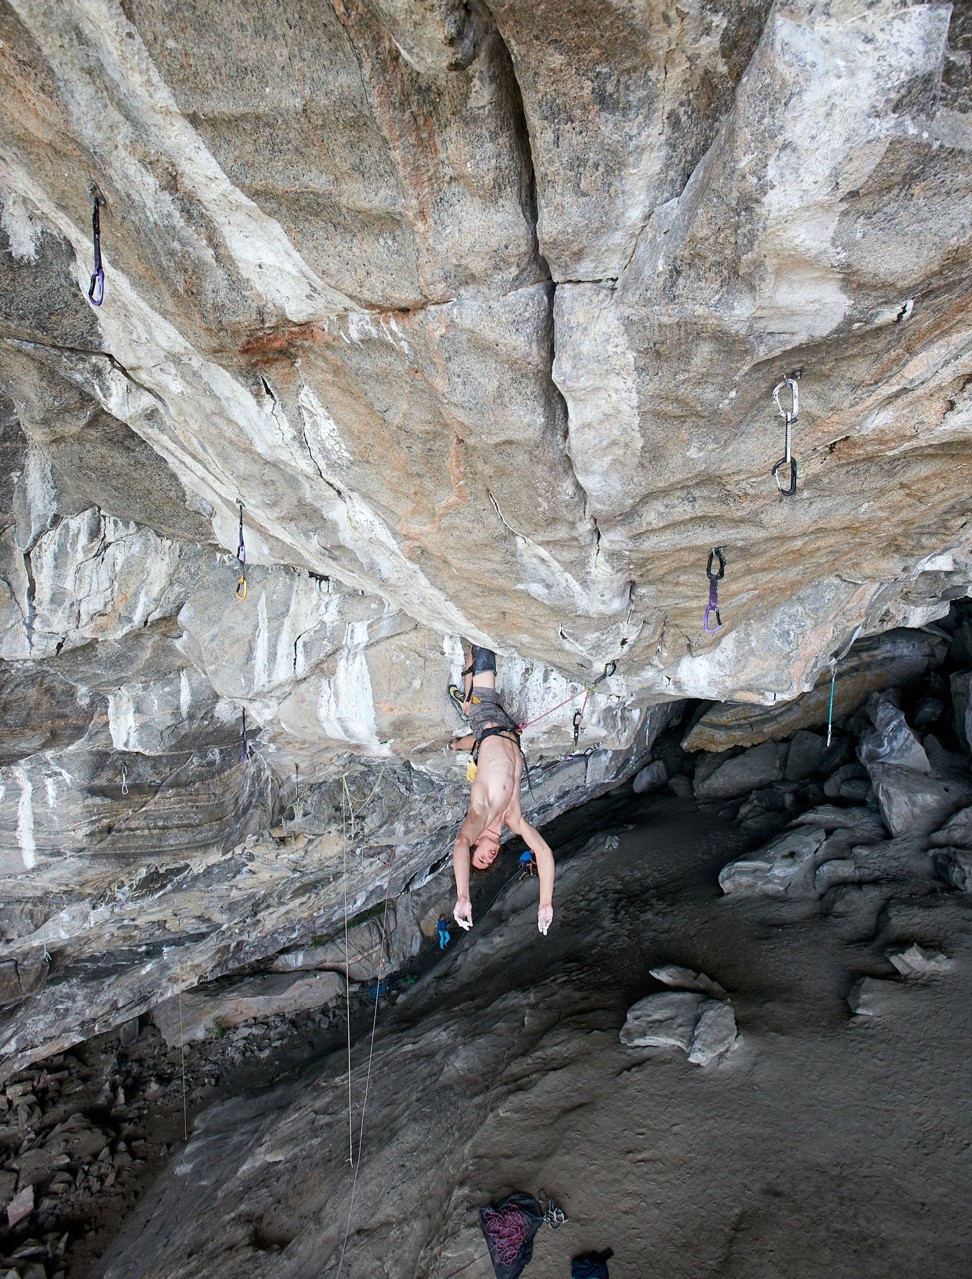 Czech climber Adam Ondra inverted inside the Hanshelleren Cave, Flatanger, Norway, in a preparatory climb ahead of Tuesday's successful attempt on the world's first 9c-rated route in the cave. Photo: Montura